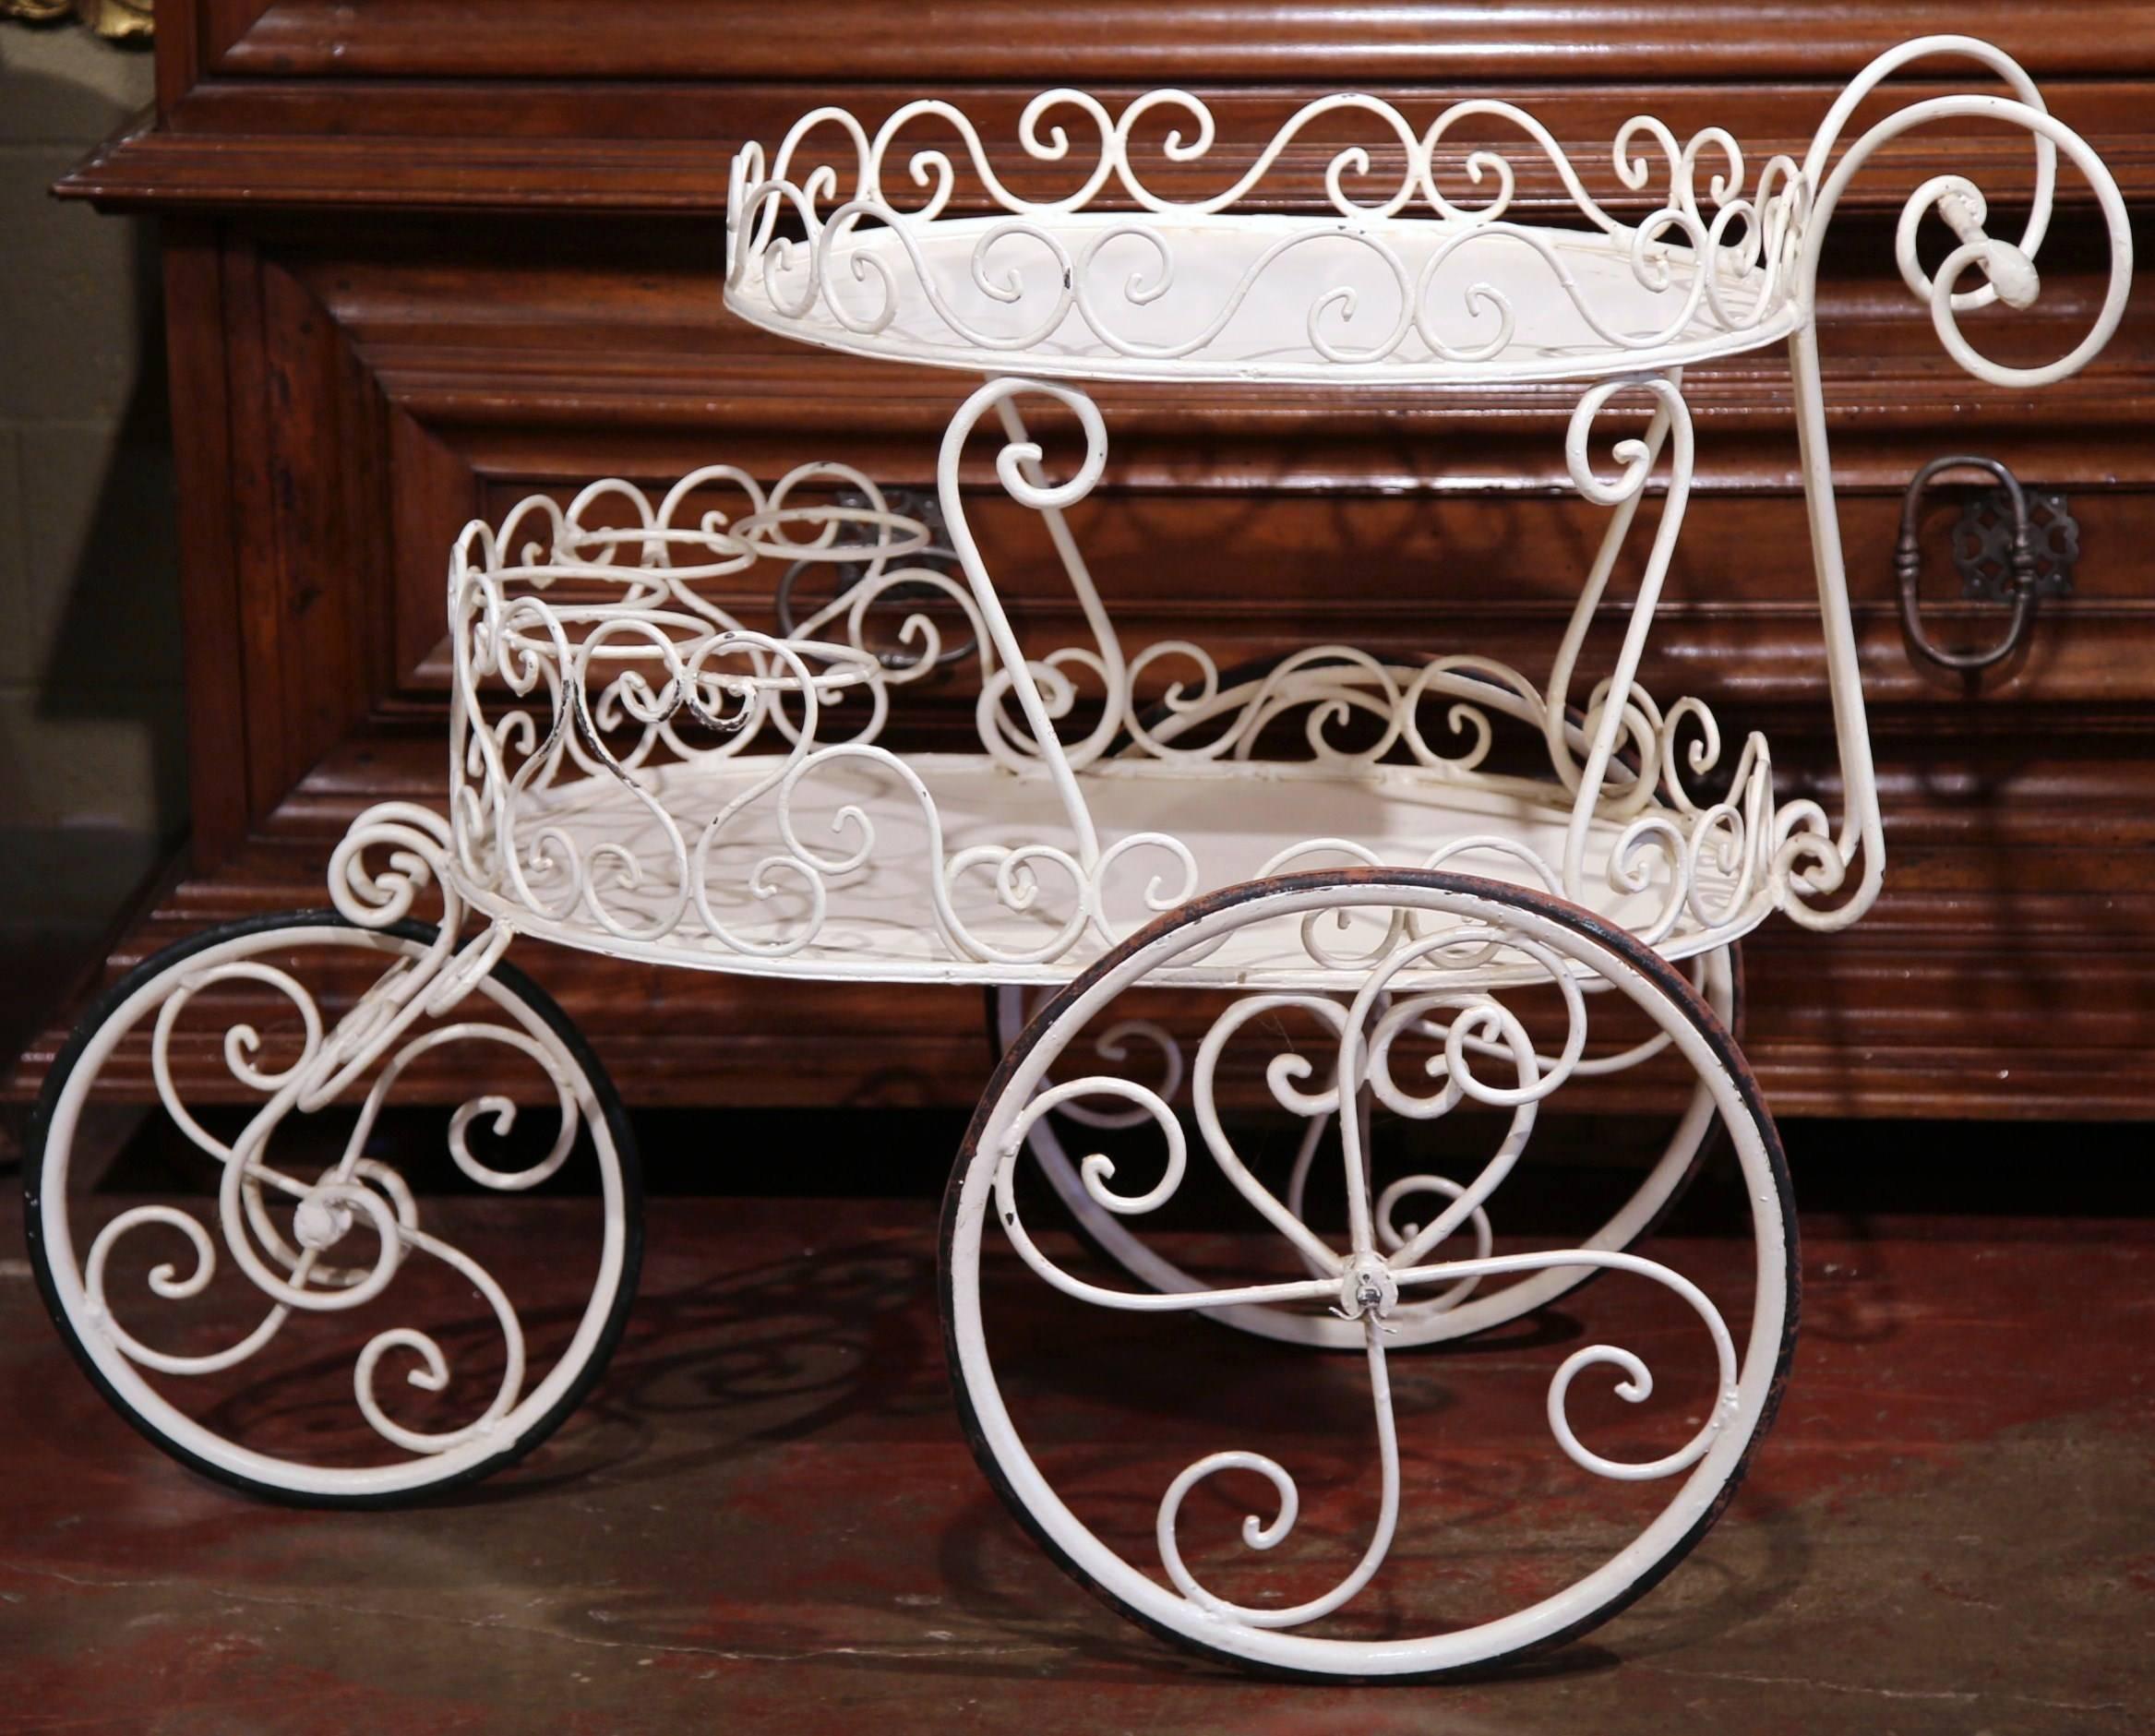 Hand-Crafted Early 20th Century French Painted Iron Garden Bar Cart on Wheels